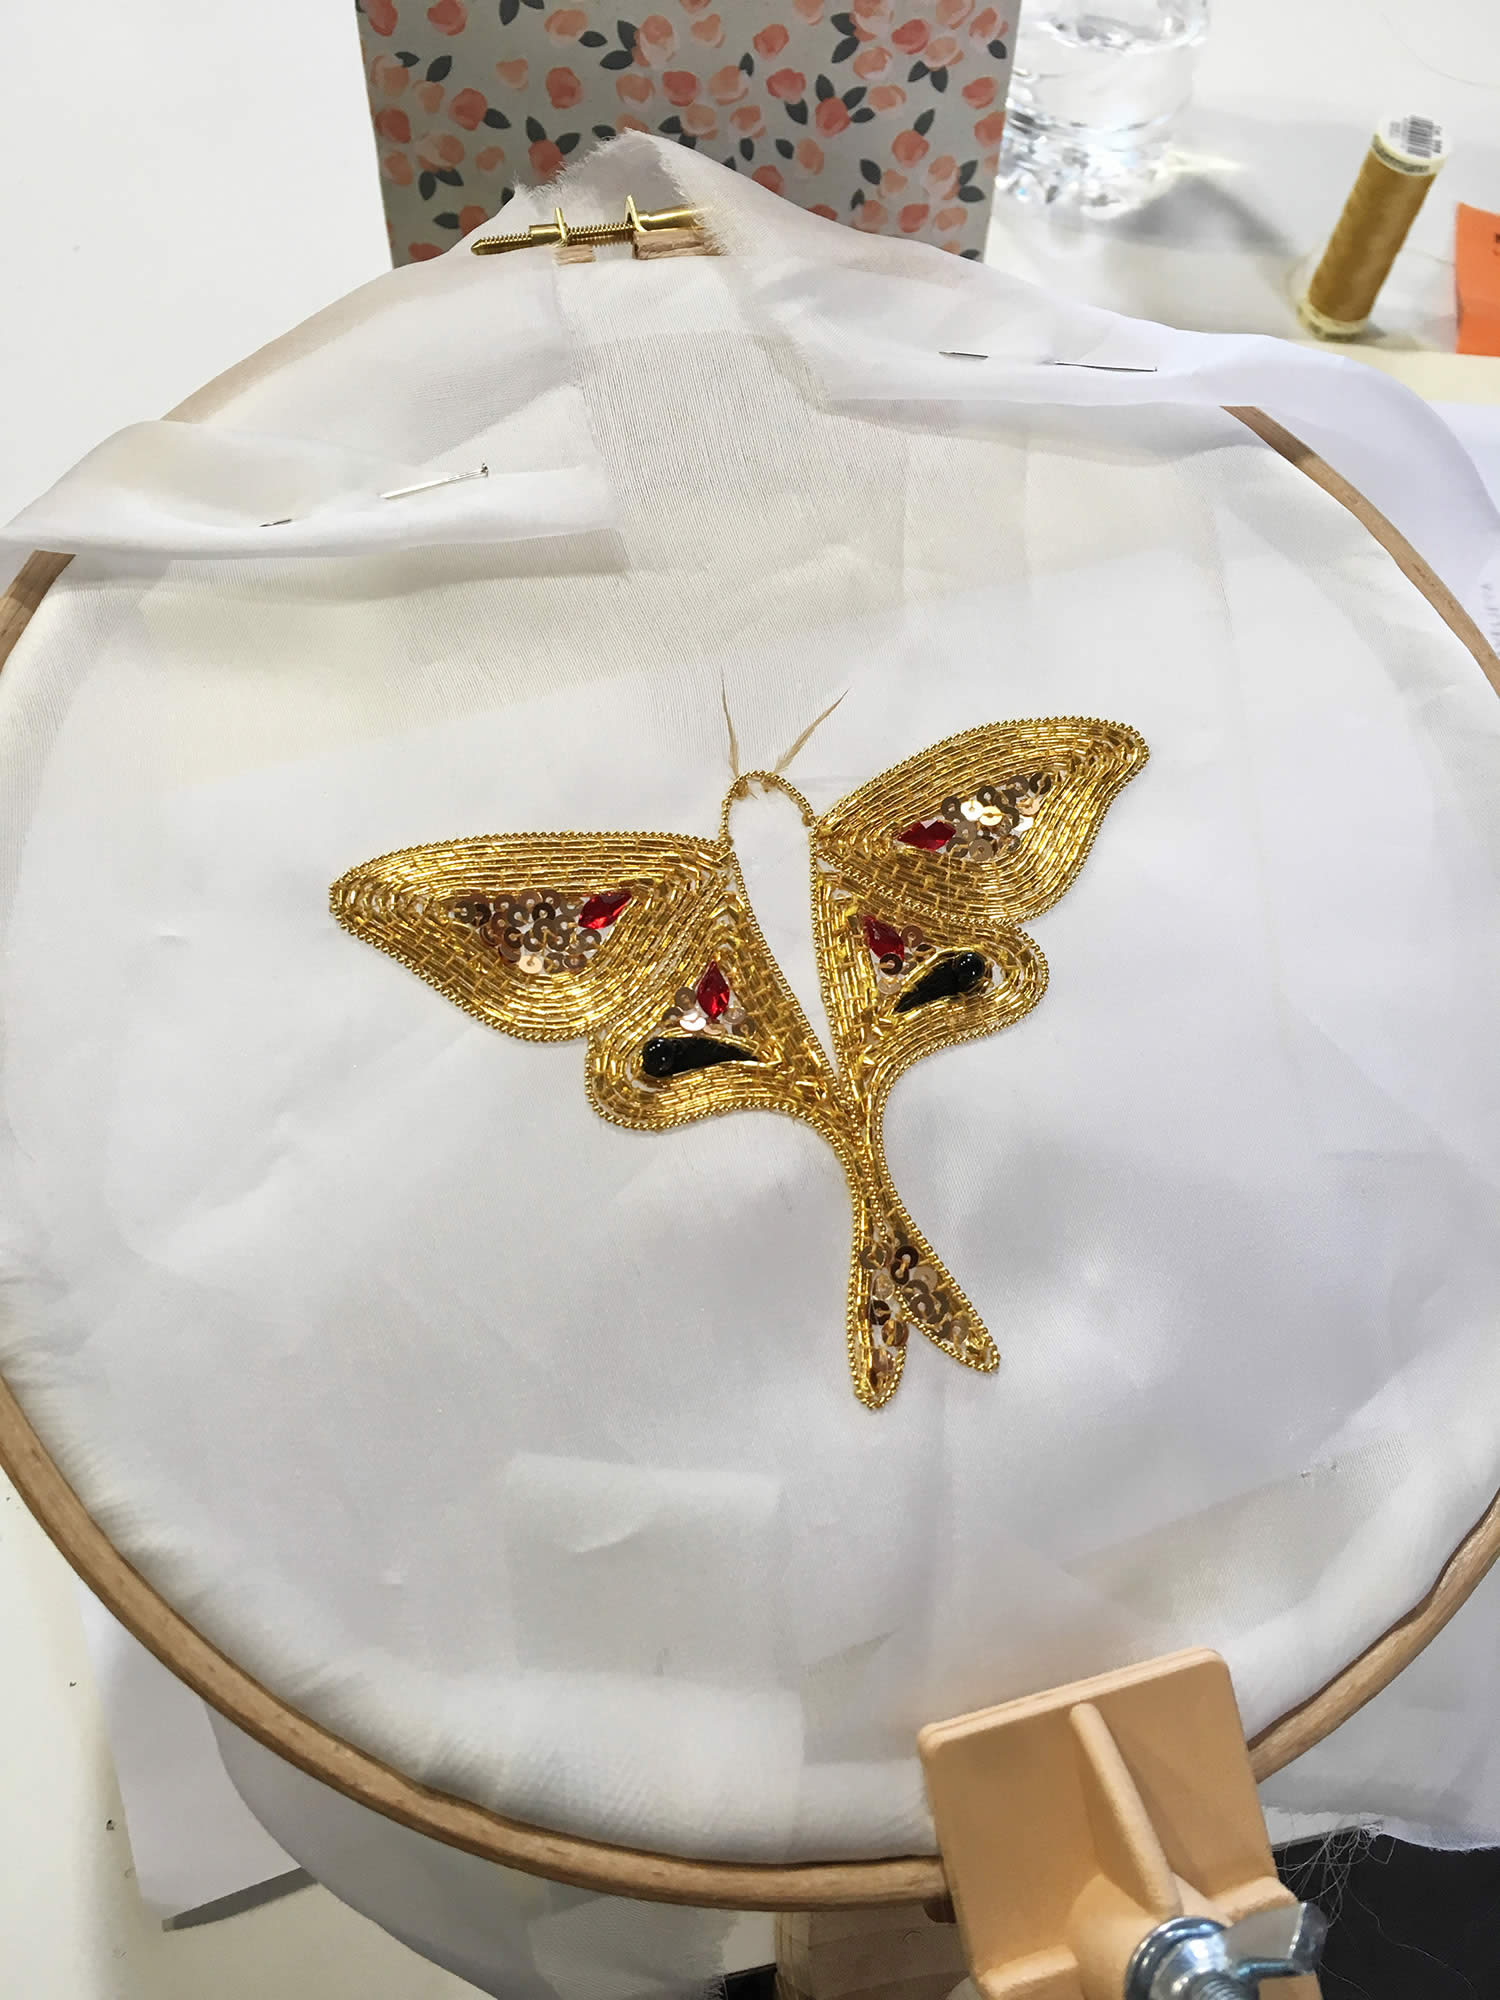 Hand-embroidered moth brooch - Goldwork Couture Embroidery - work in progress - JS Embroideries classes